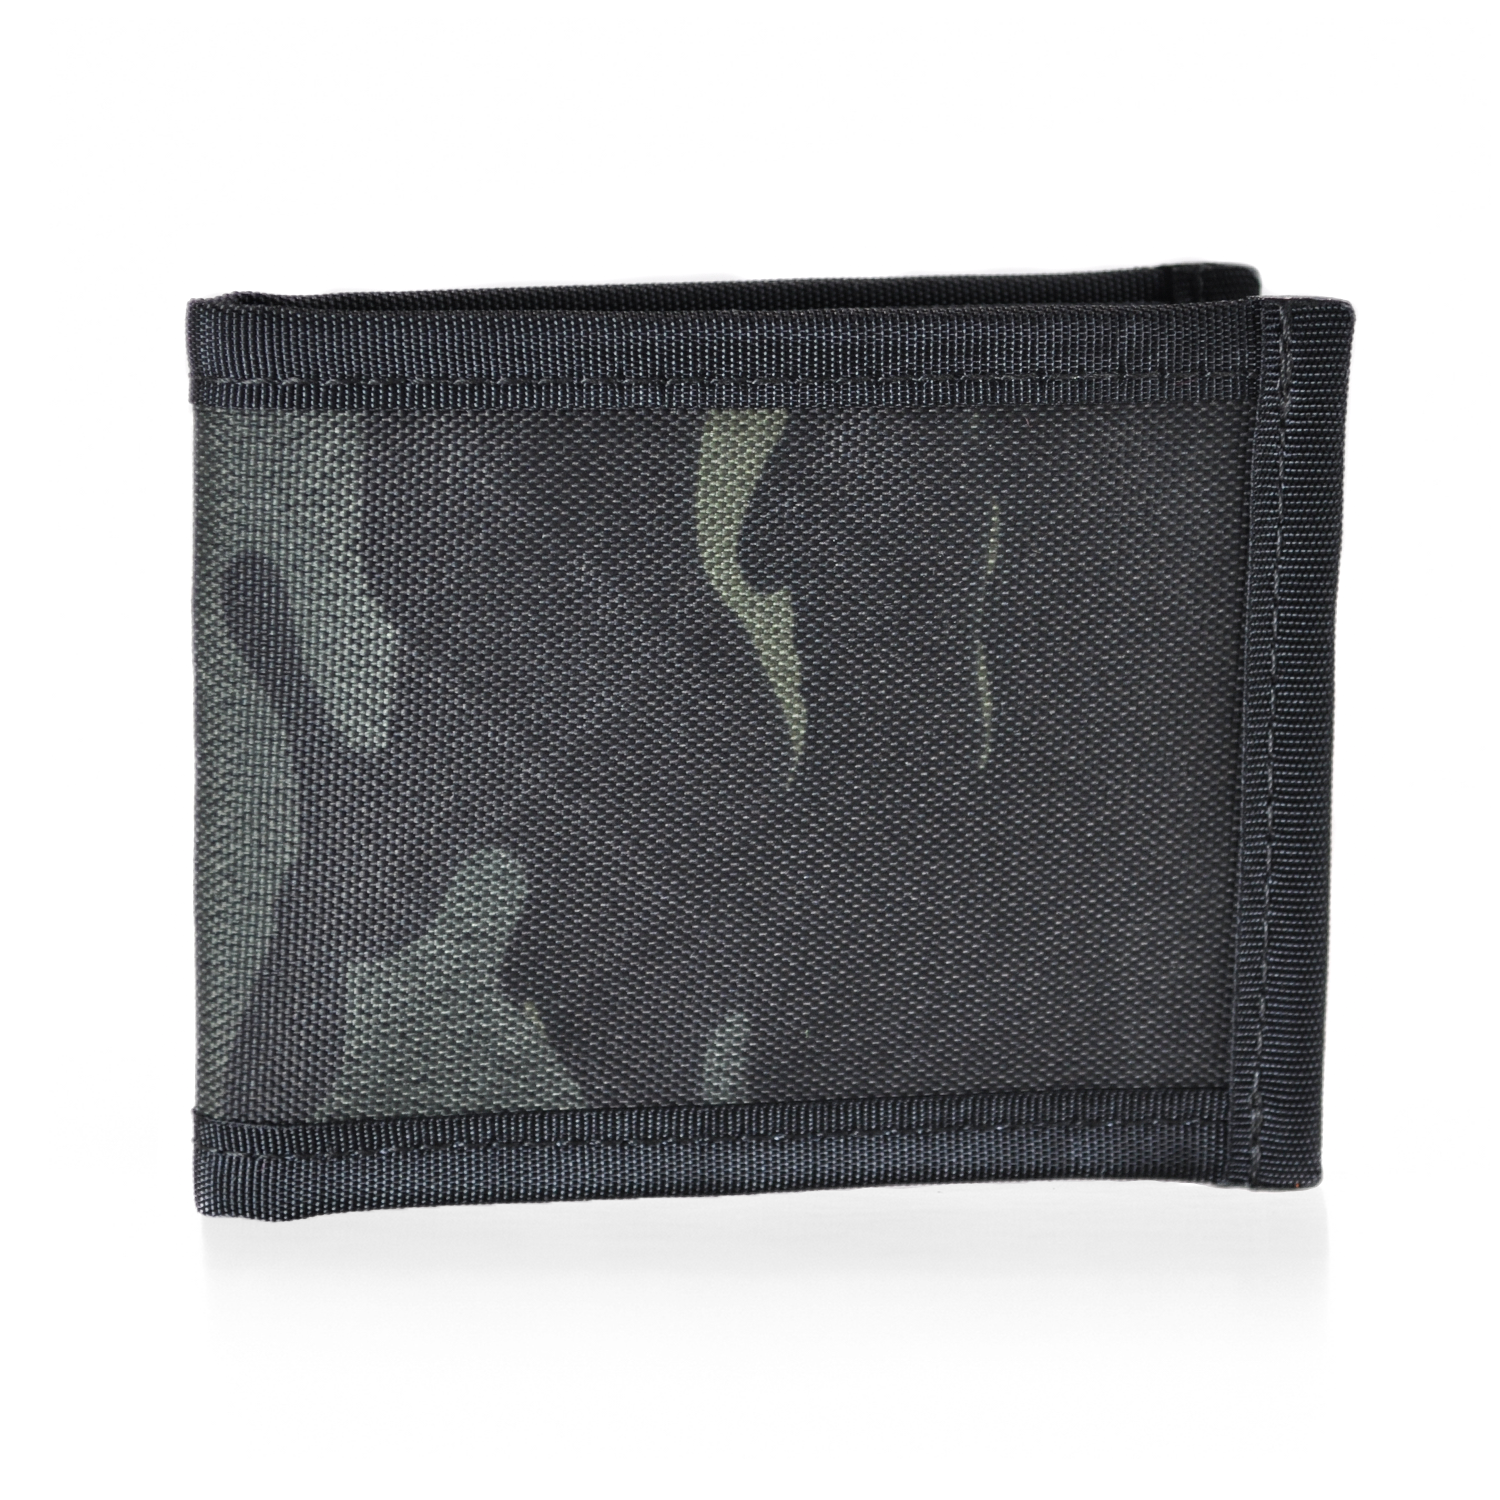 Flowfold Vanguard Bifold Wallet Made in USA, Maine by Flowfold of Recycled Polyester EcoPak Fabric, Camo